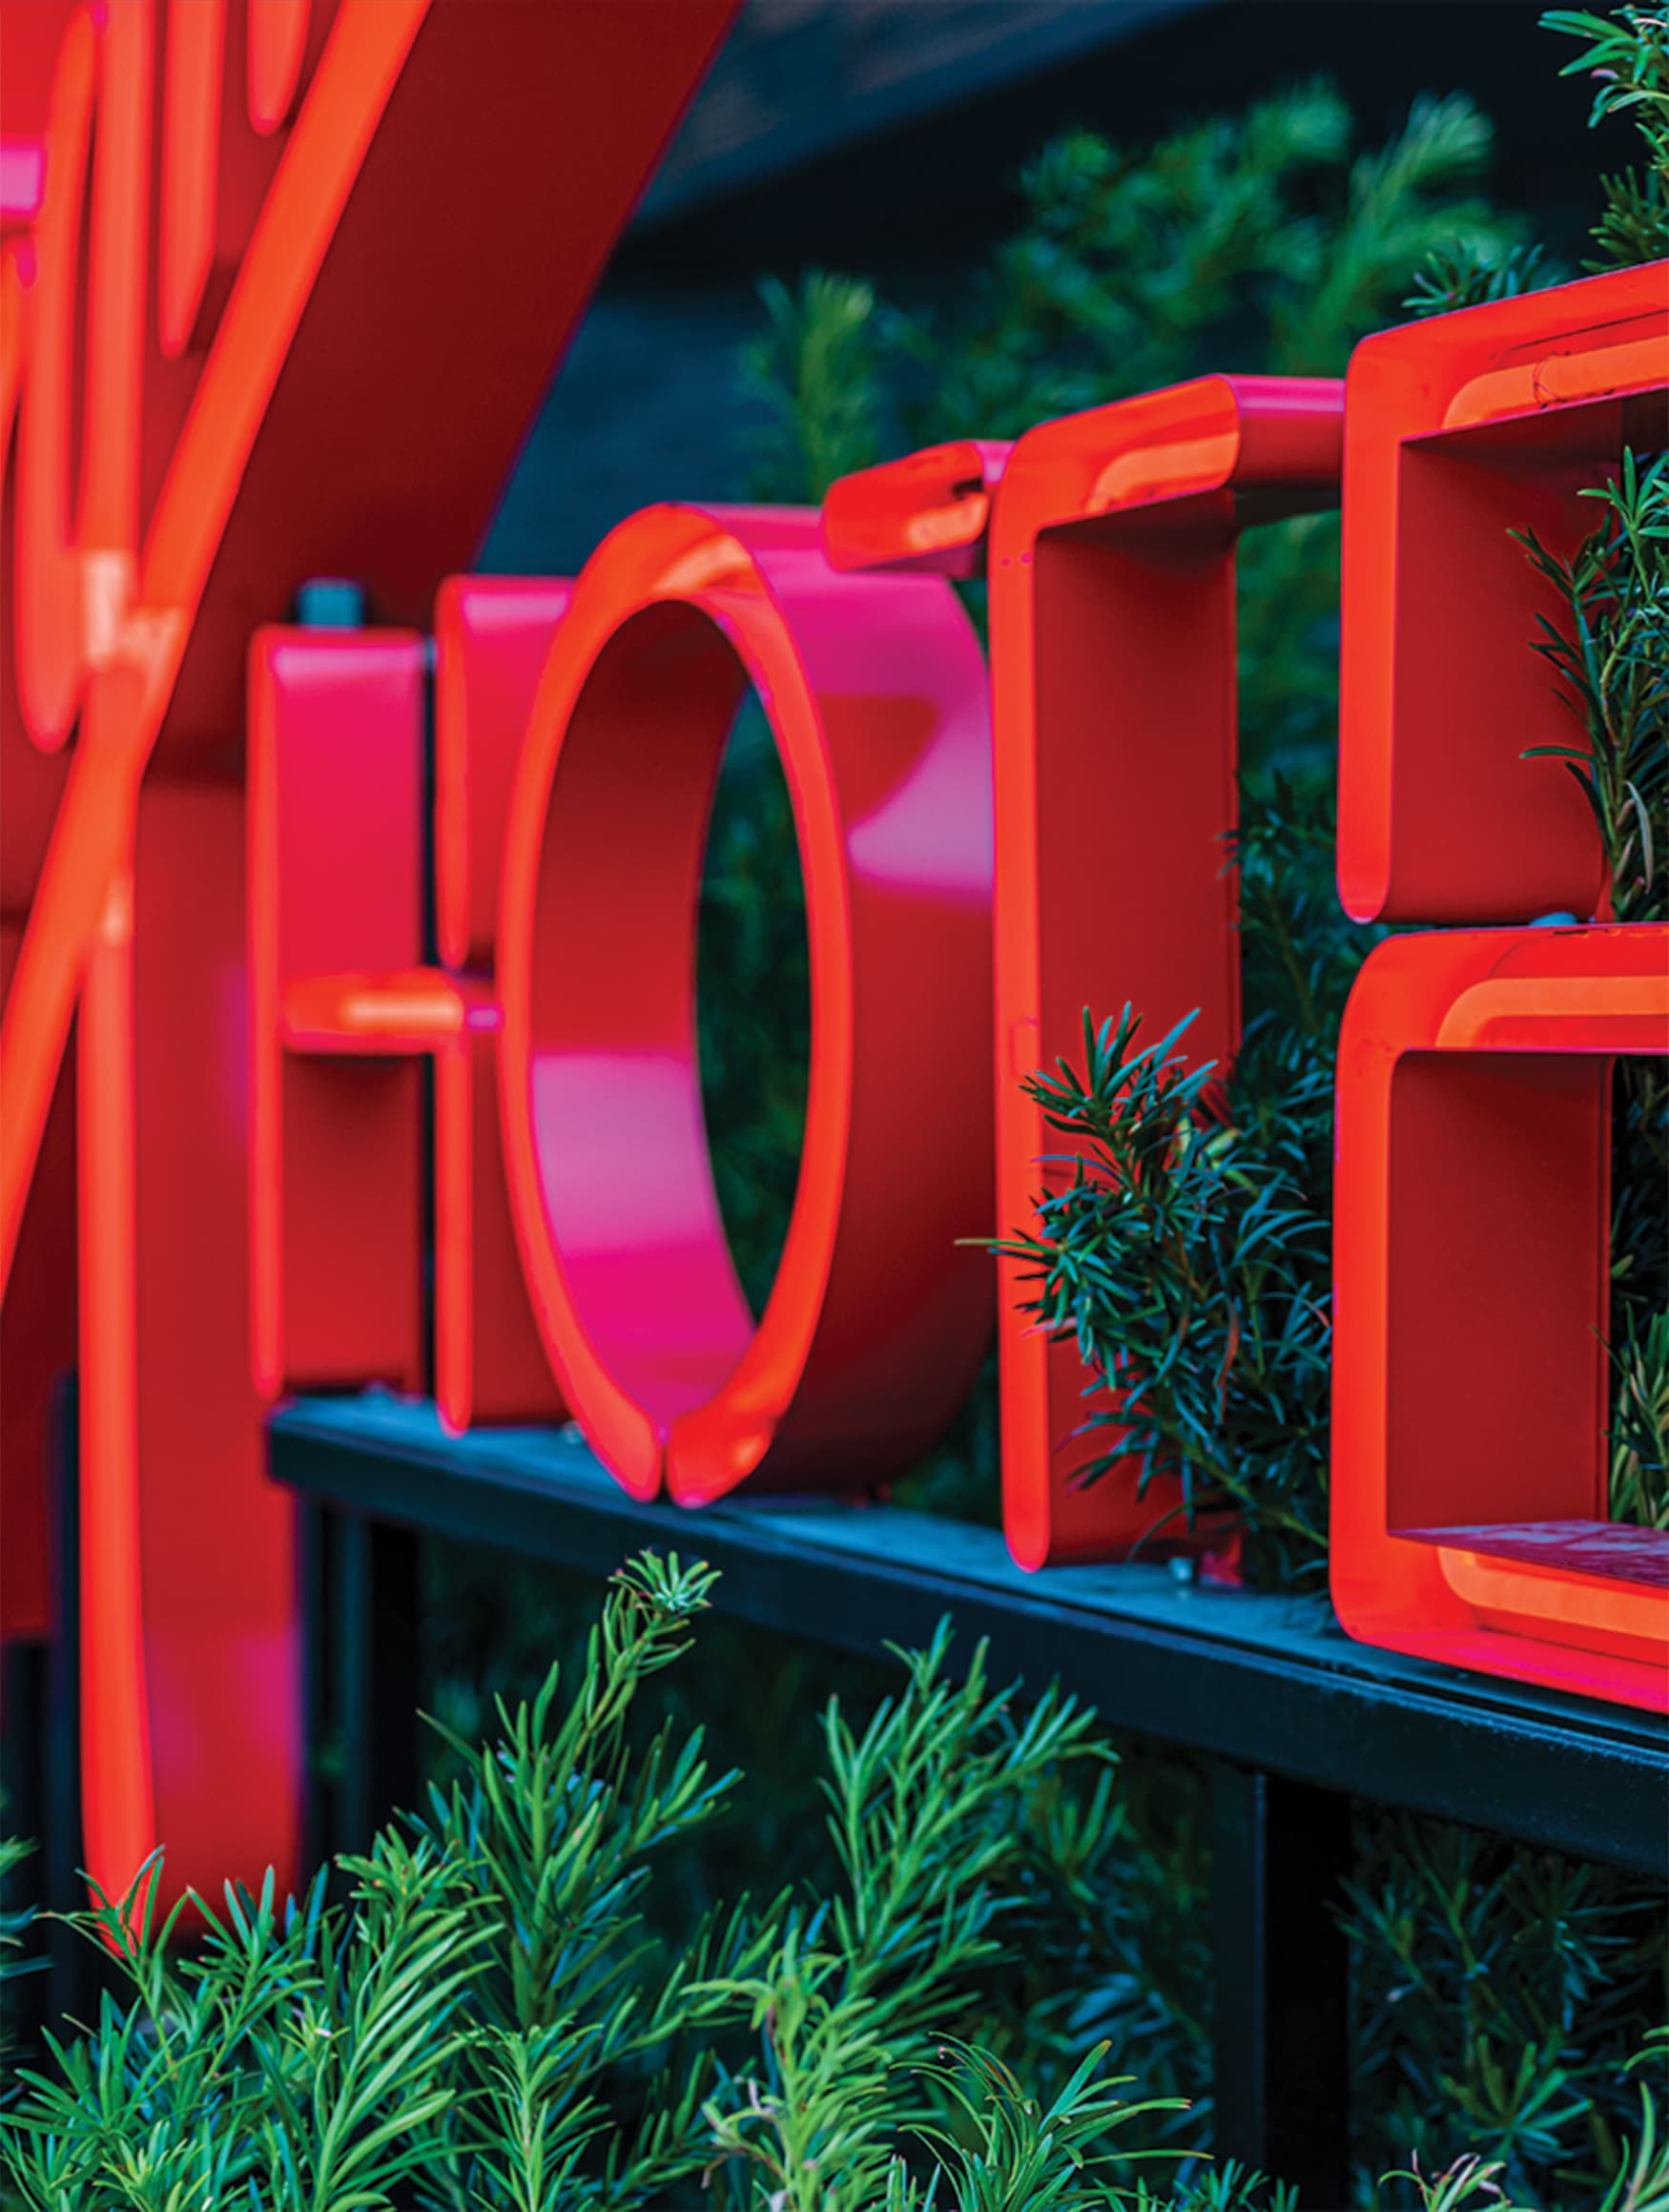 Virgin Hotels Open Face Channel Letter Hospitality Signage